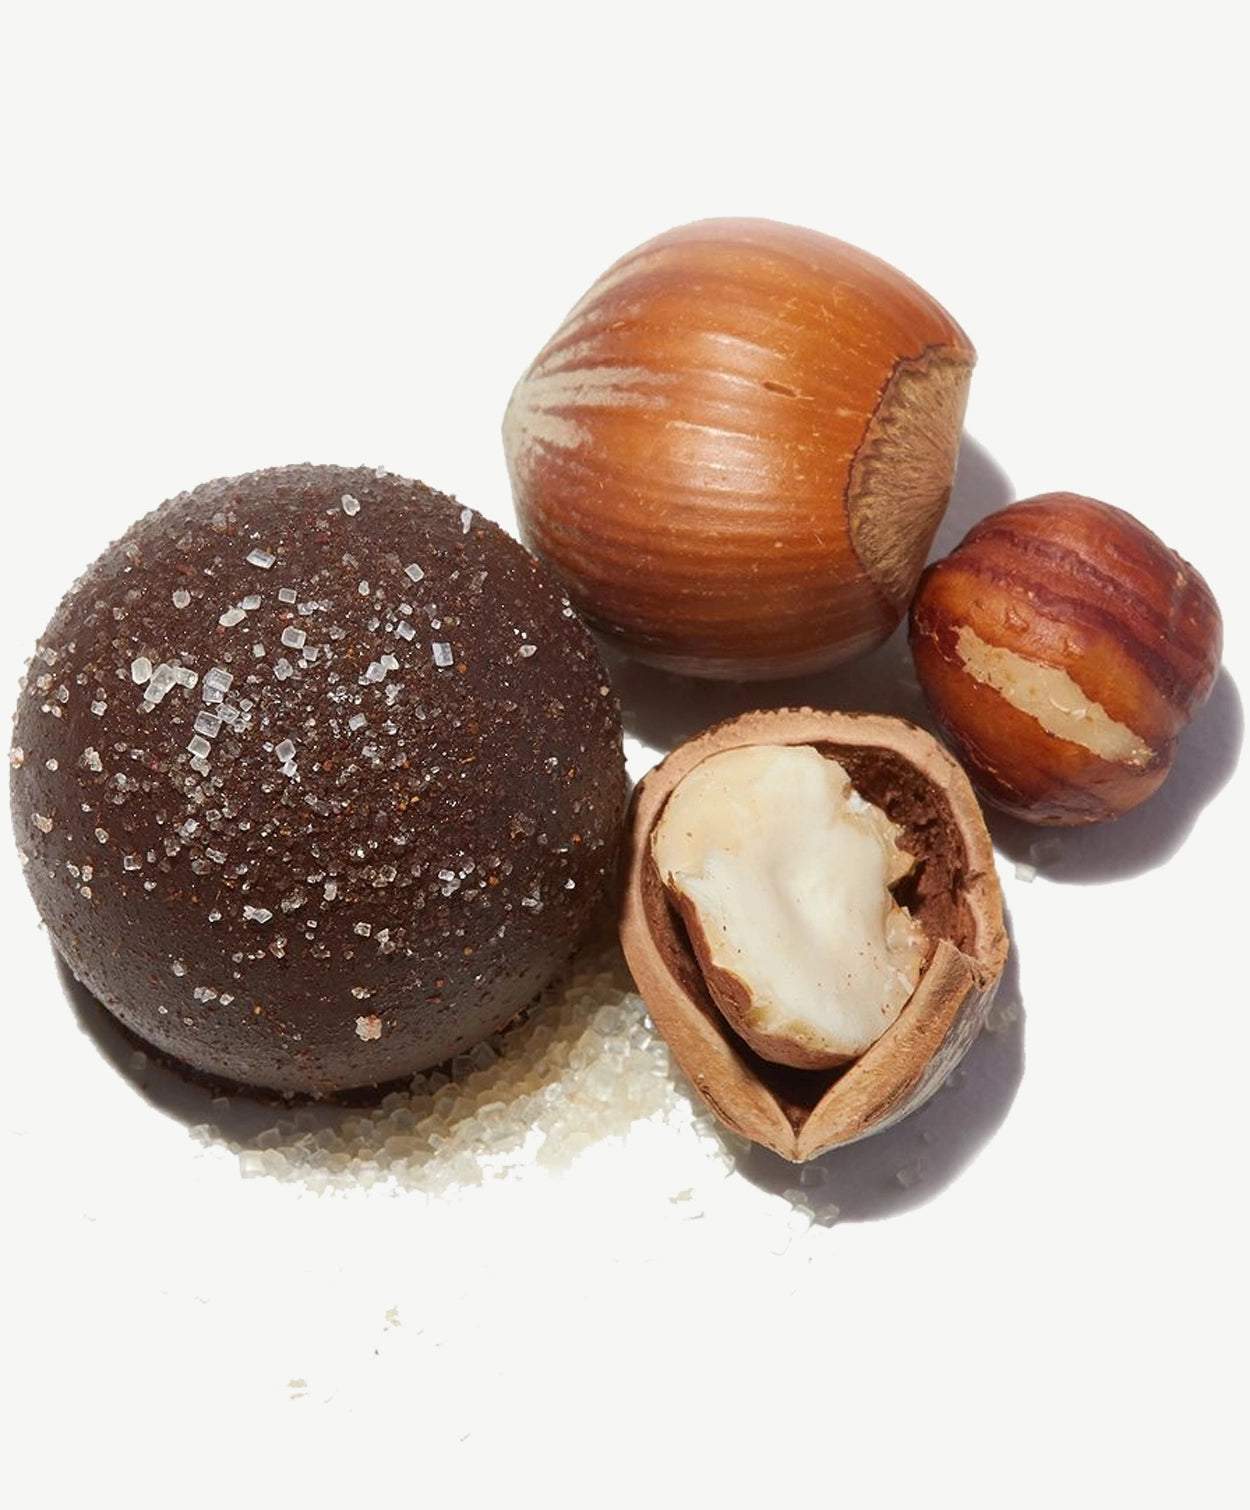 Close-up view of a Vosges vegan  I.G.P. Piemonte Hazelnut truffle topped with cinnamon sugar next to cracked hazelnuts on a white background.